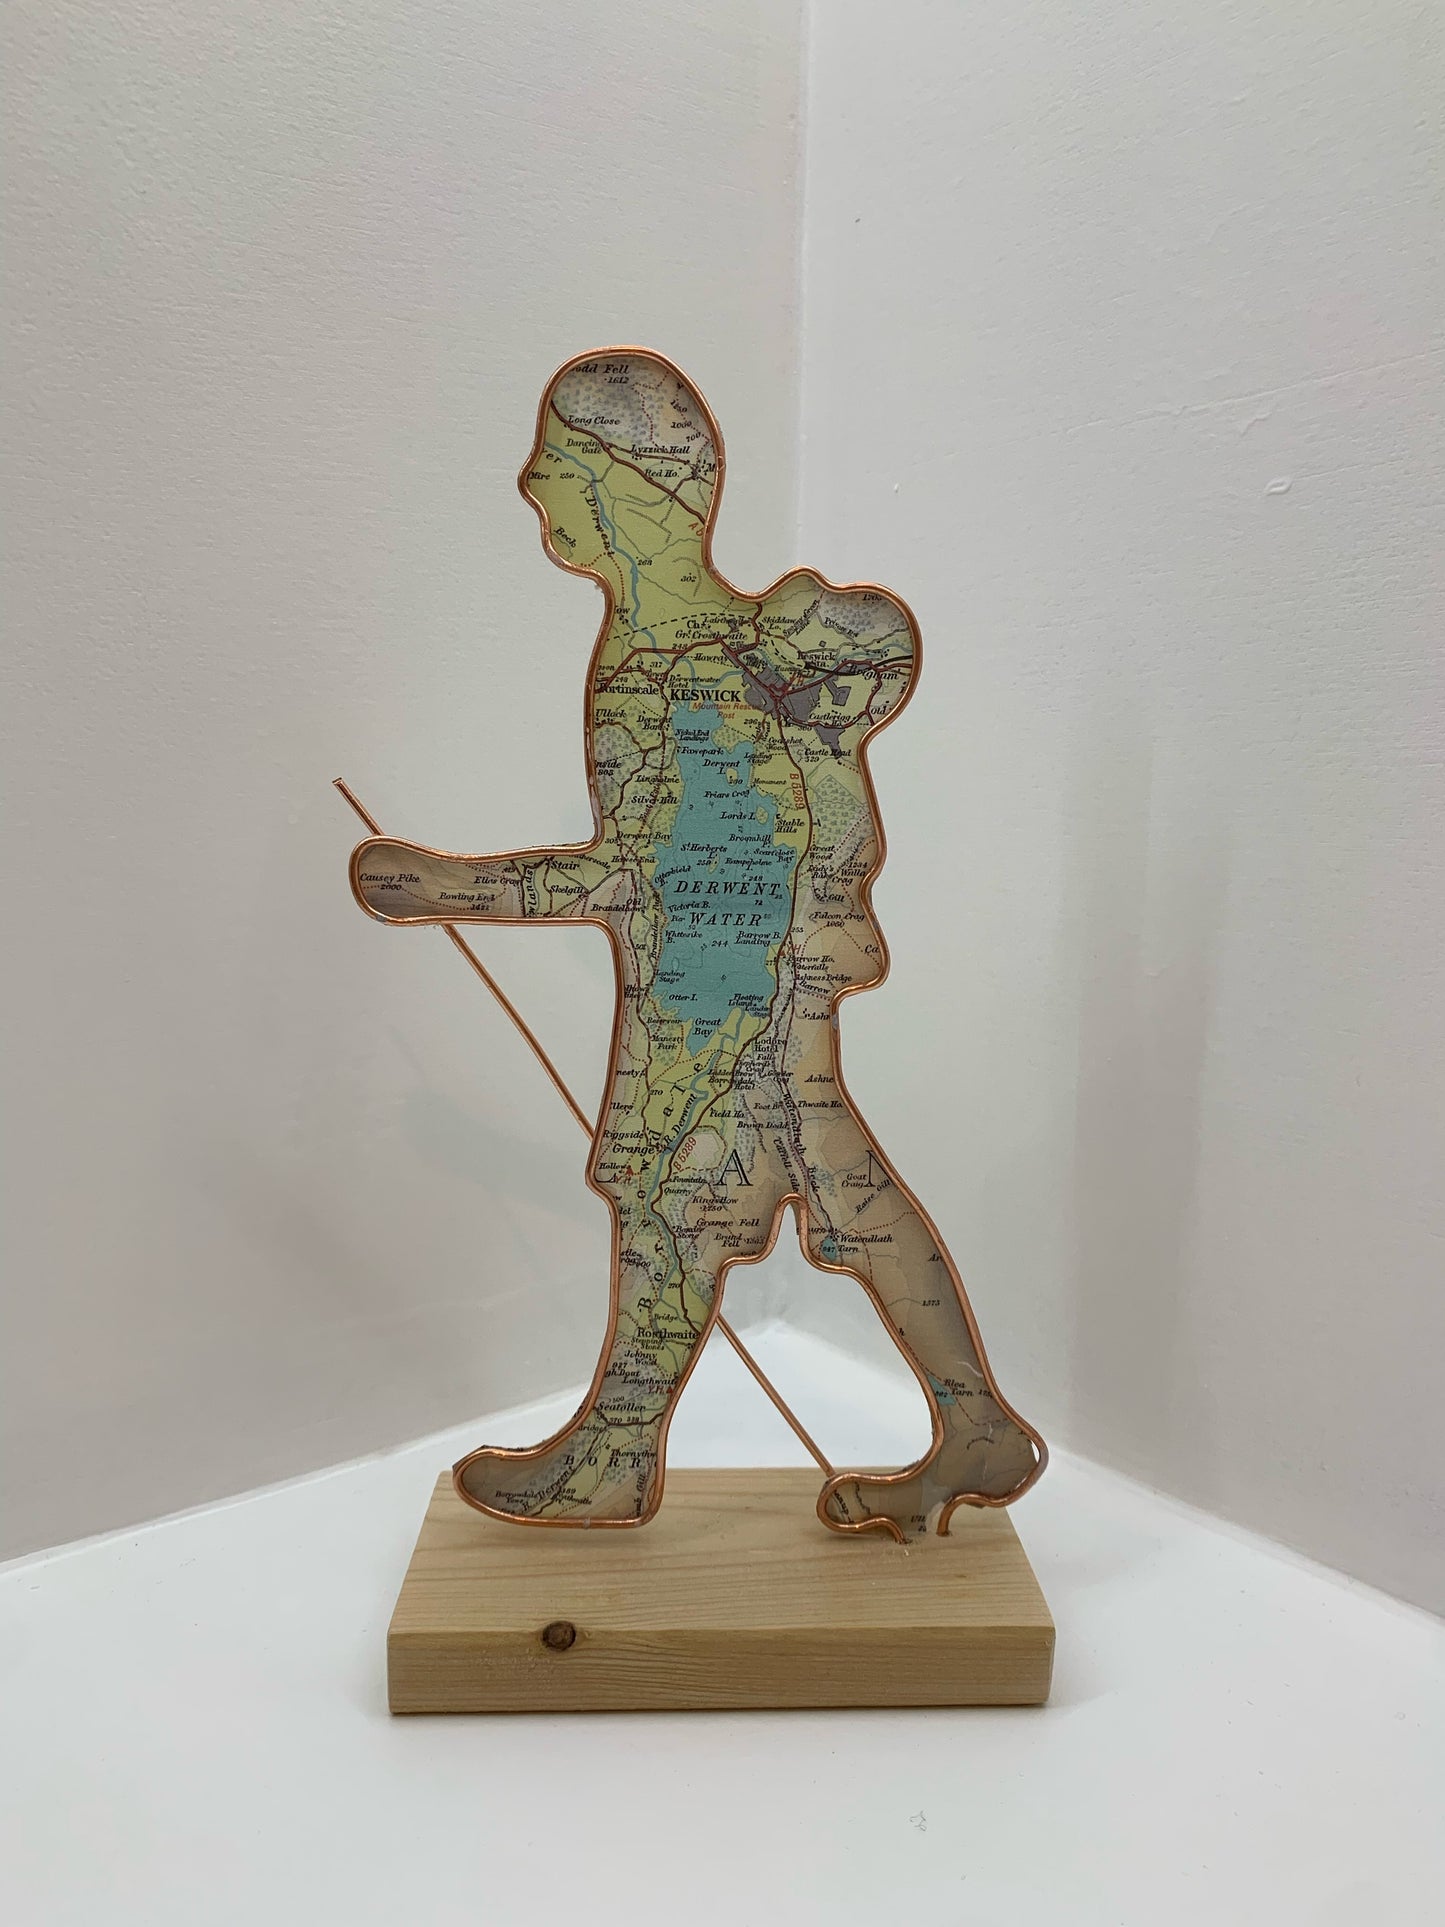 Handmade Wire Sculptures Embellished with Local Maps